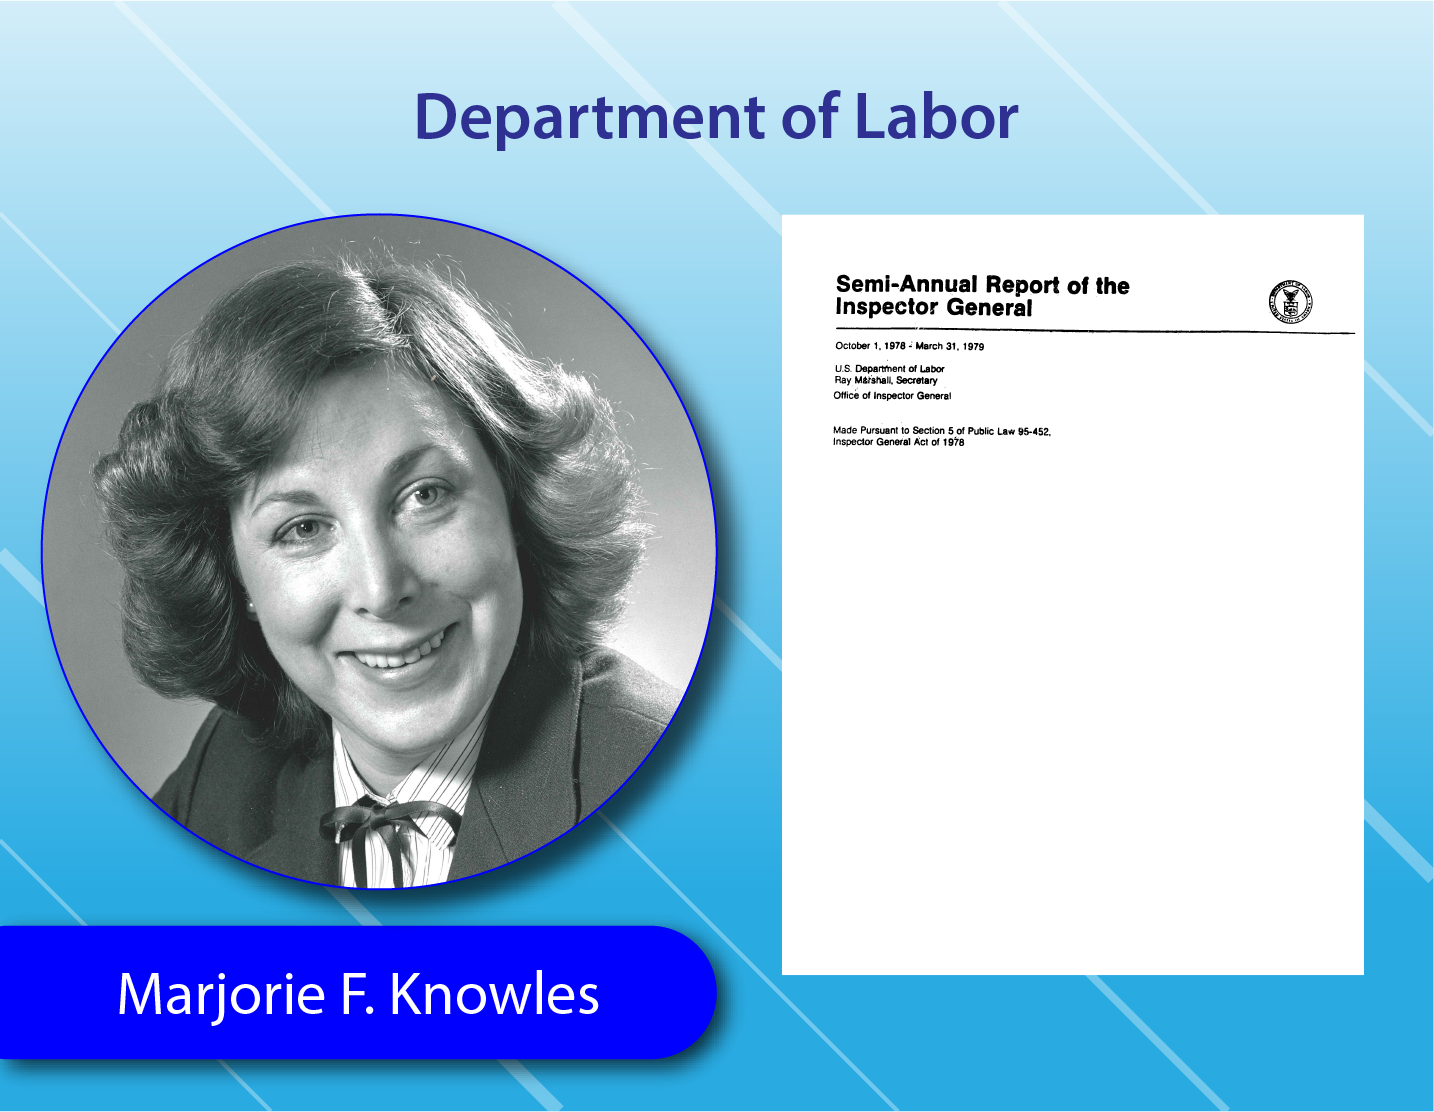 Department of Labor - Marjorie F. Knowles